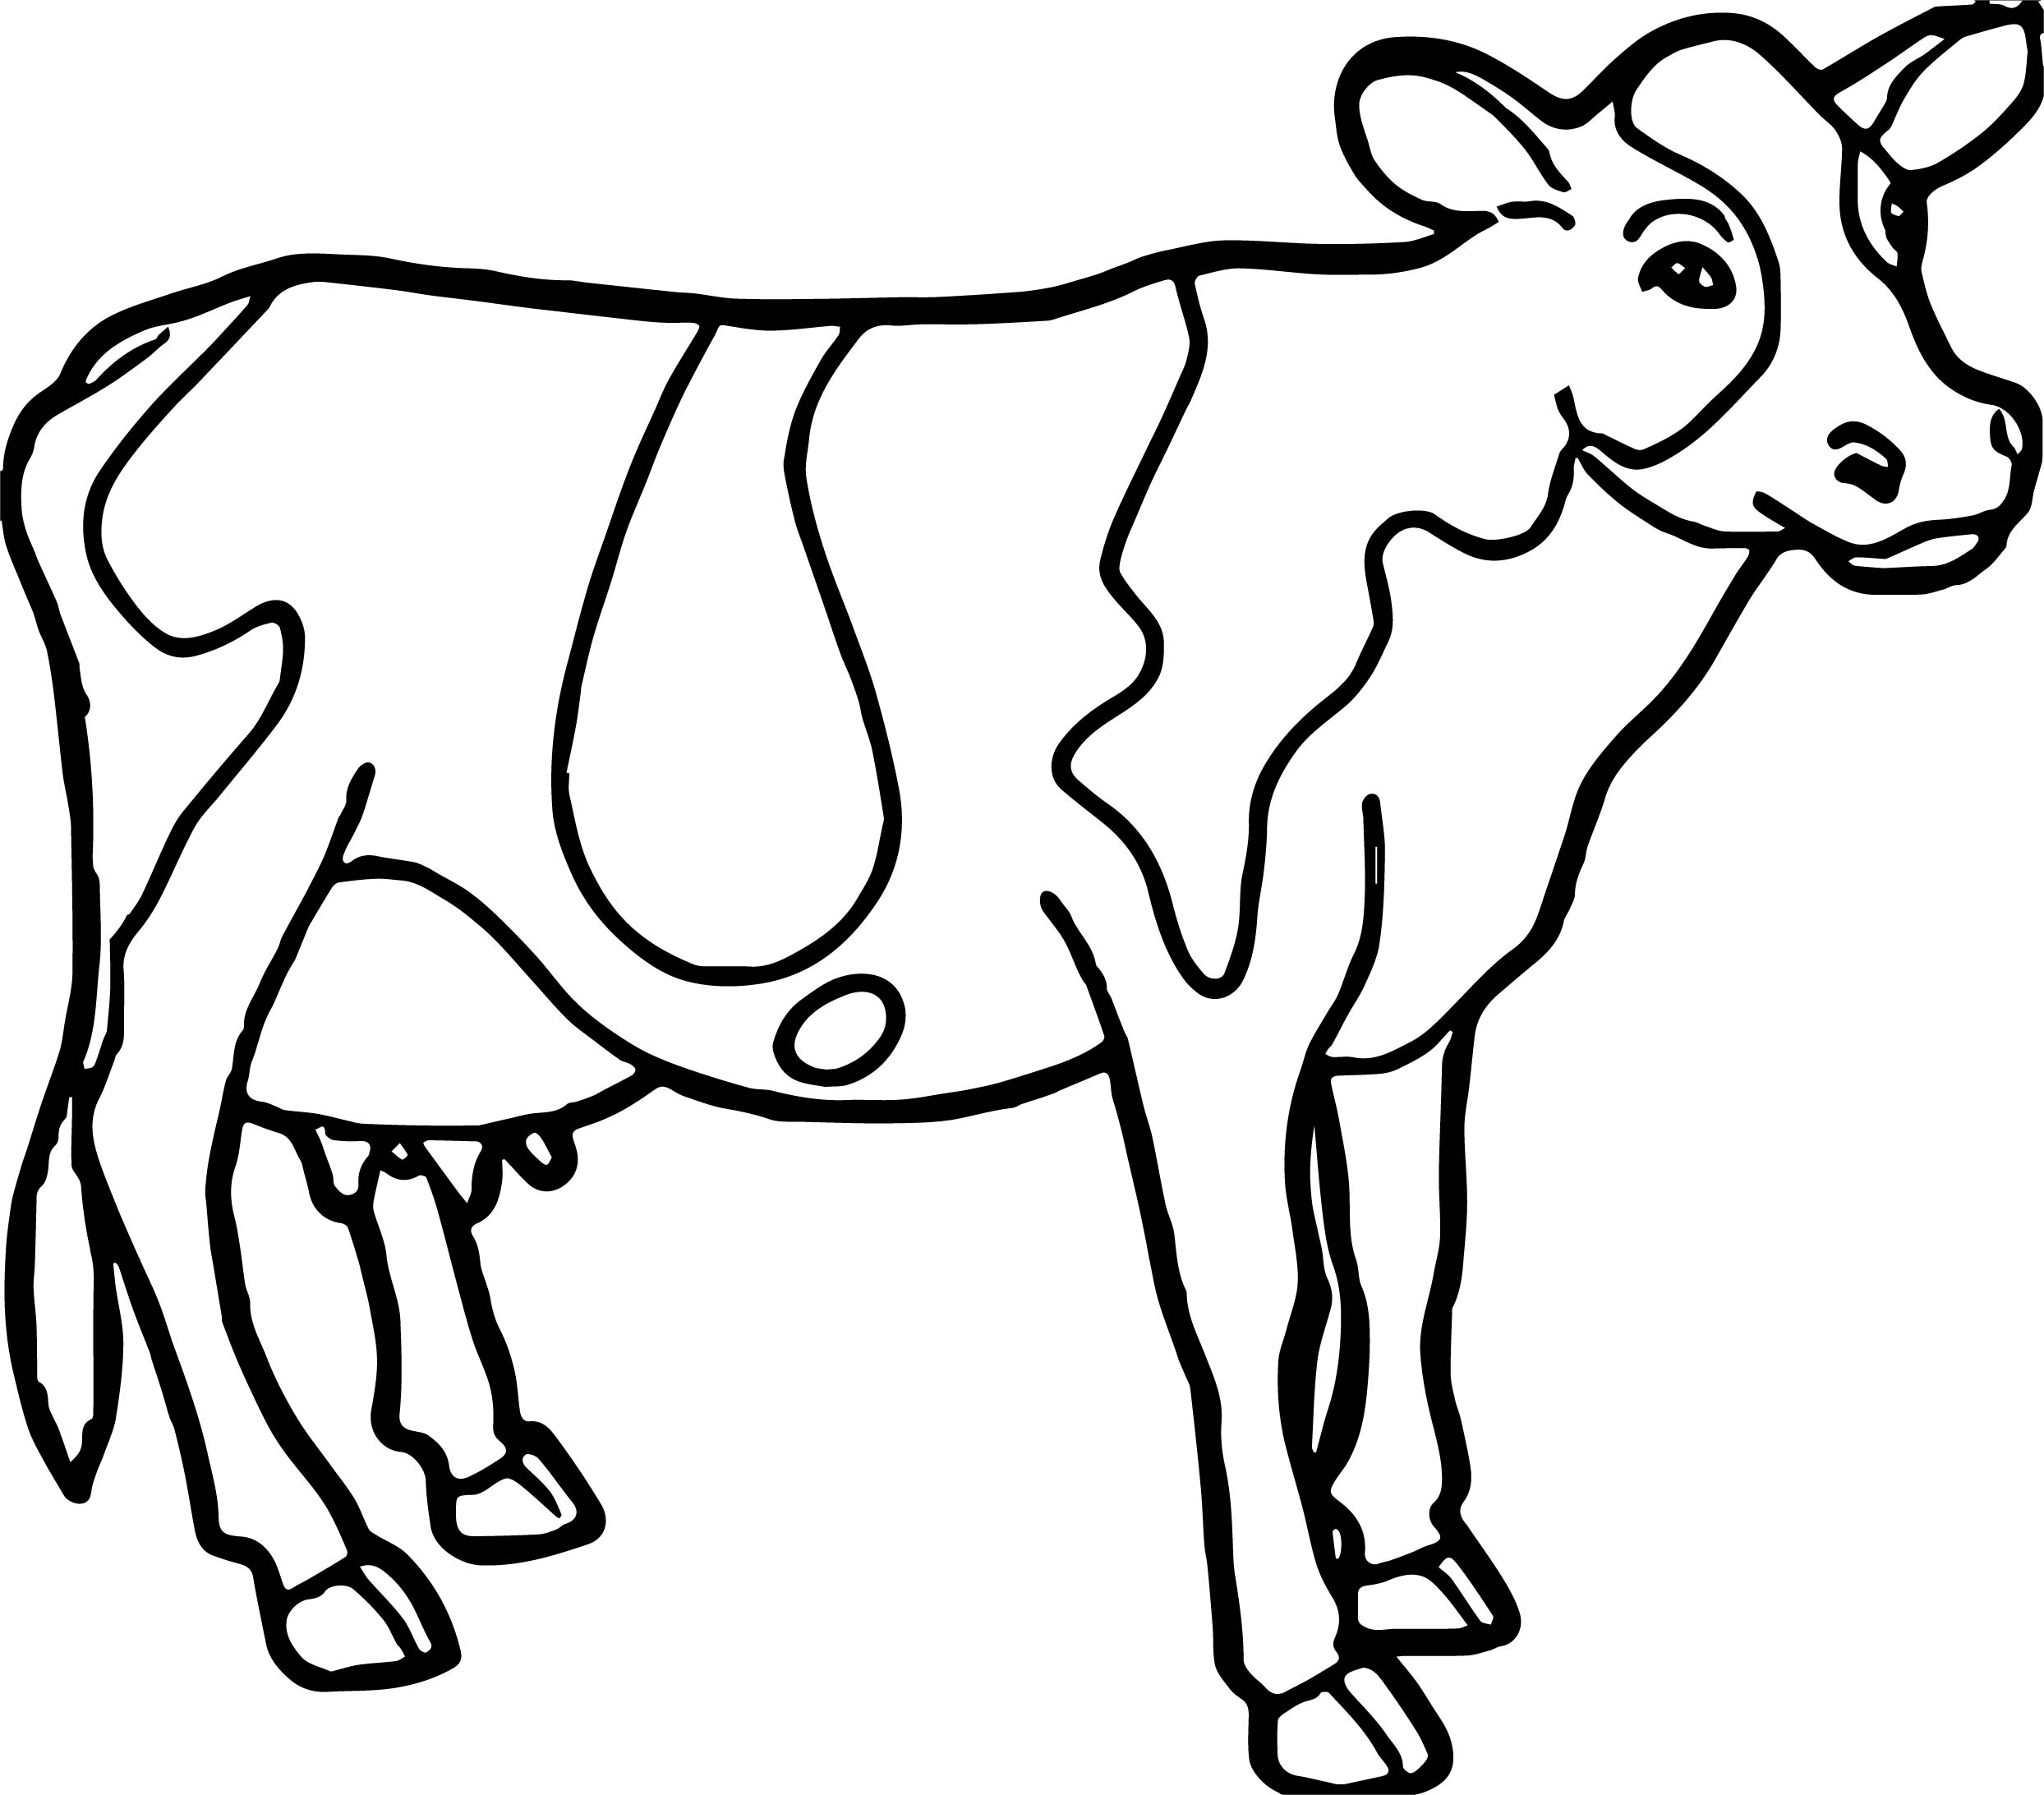 Cow Coloring Pages For Adults at Free printable